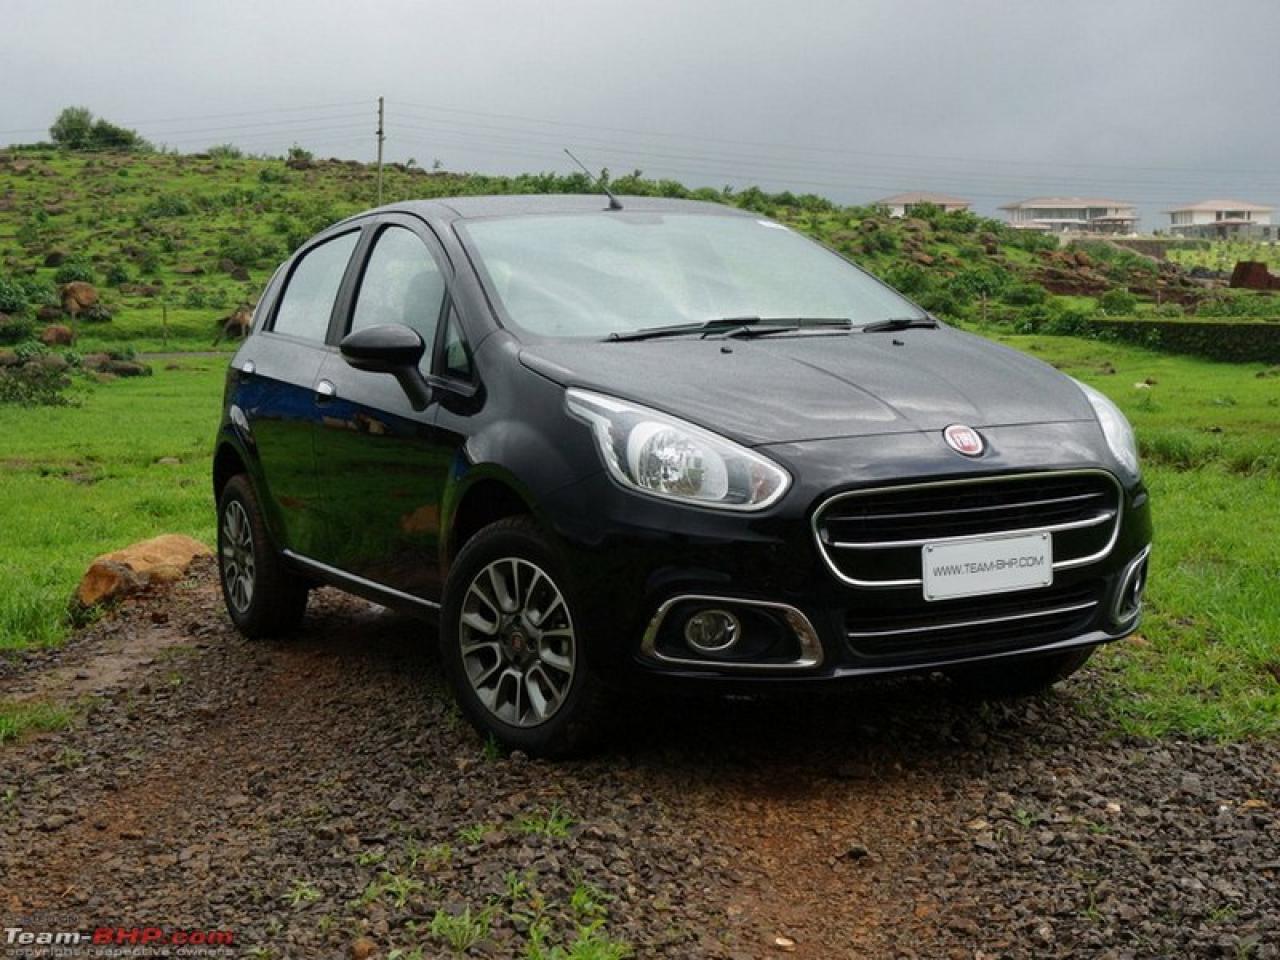 Fiat Punto Evo launched at Rs. 4.55 lakh